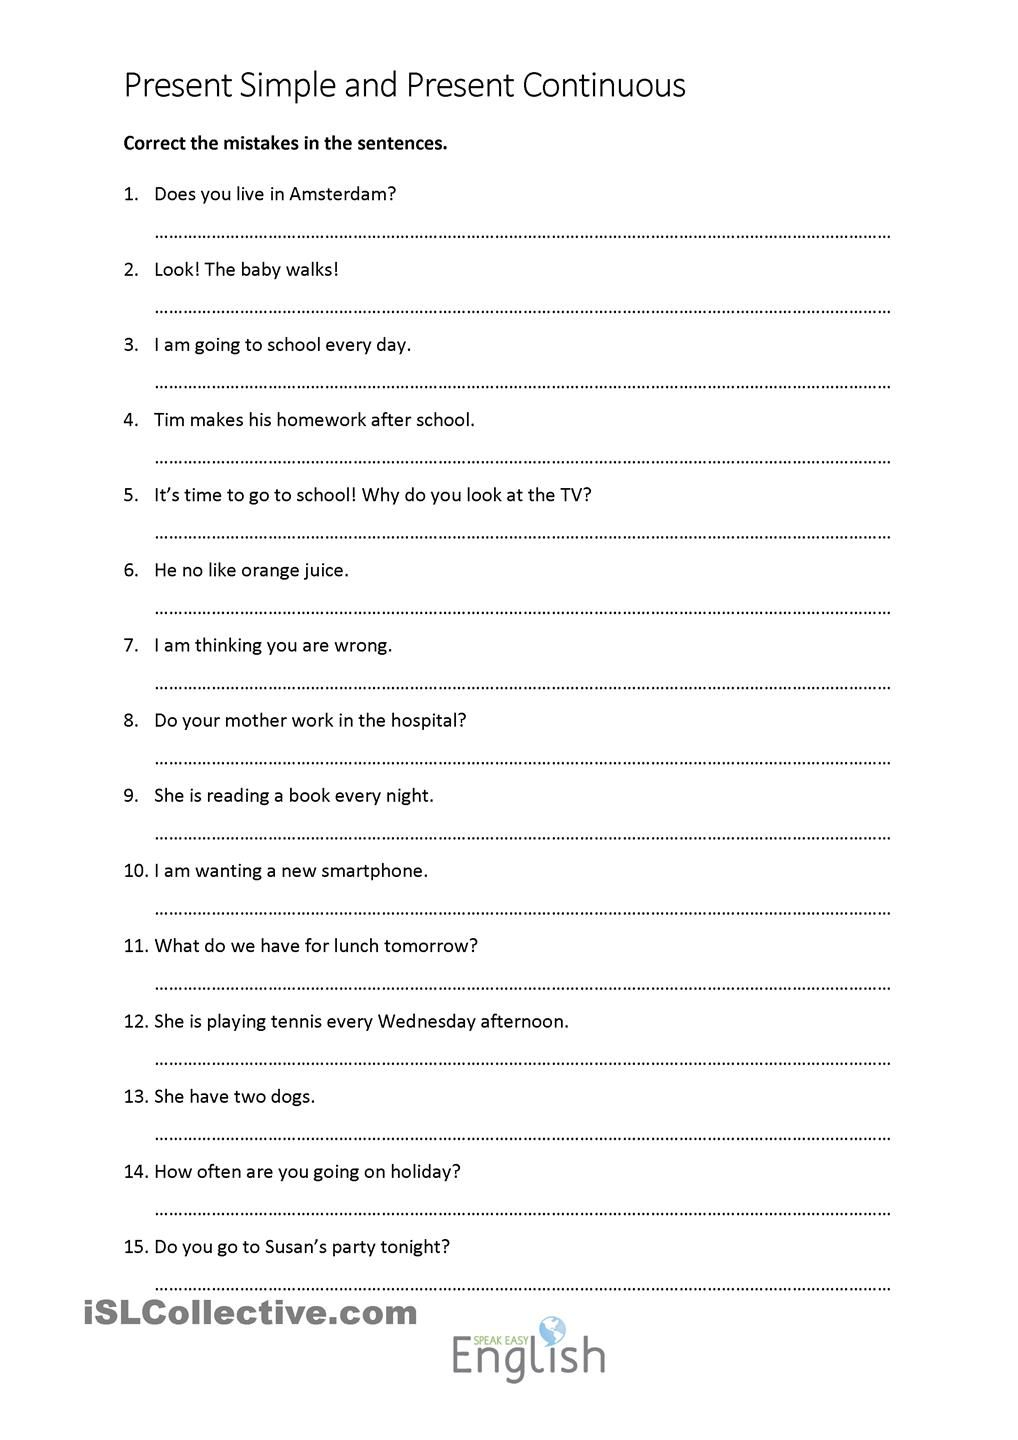 Present Simple/continuous Error Correction With Answers | Teaching - Free Printable Sentence Correction Worksheets